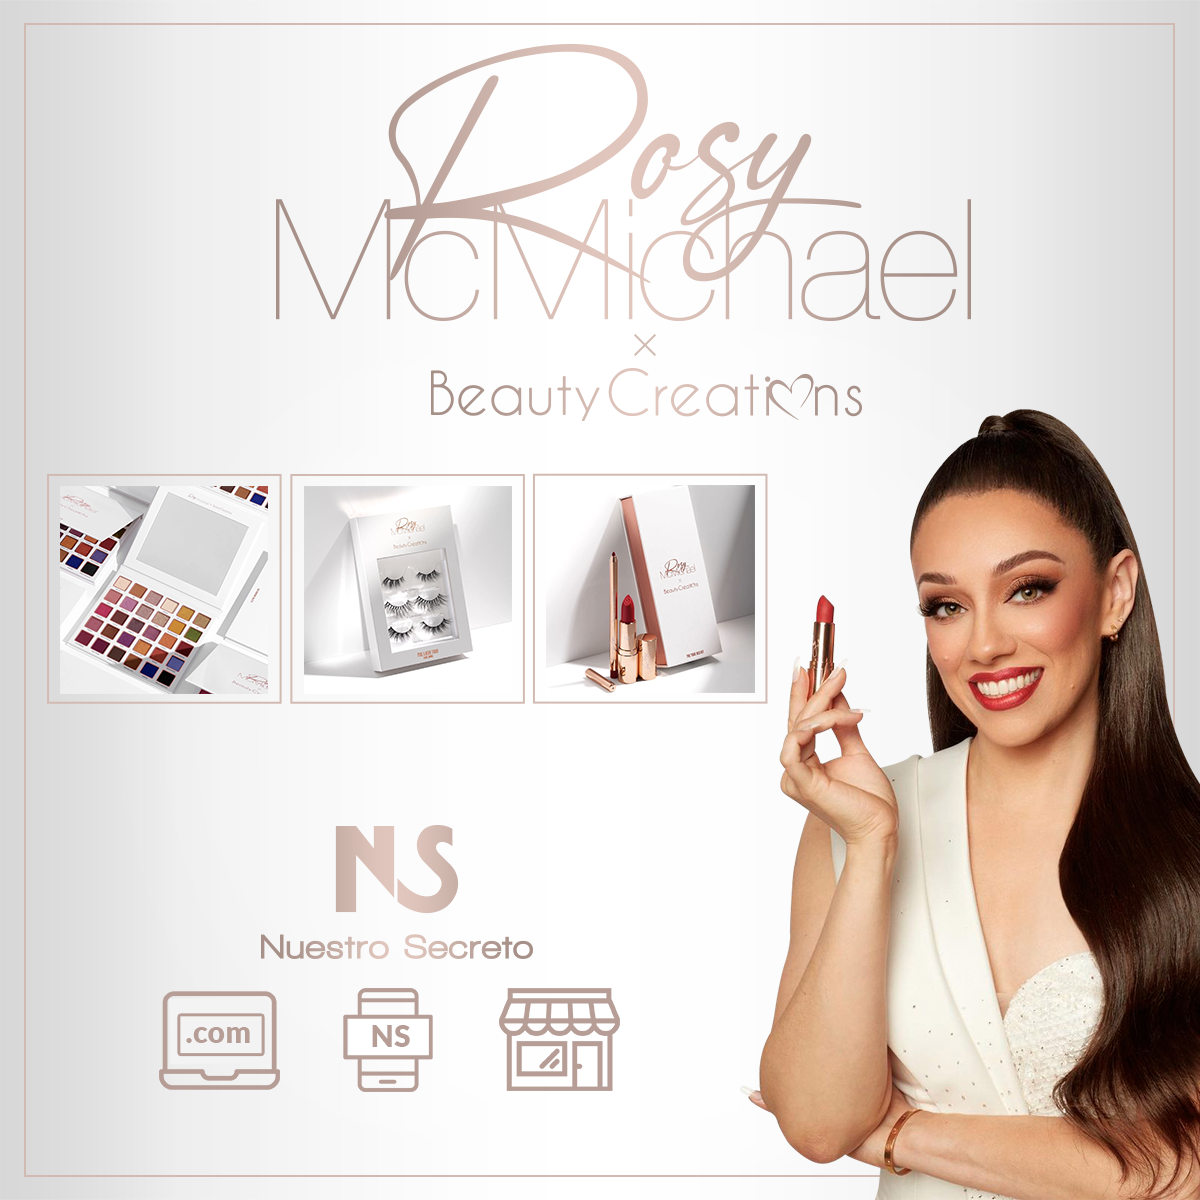 Rosy McMichael x Beauty Creations